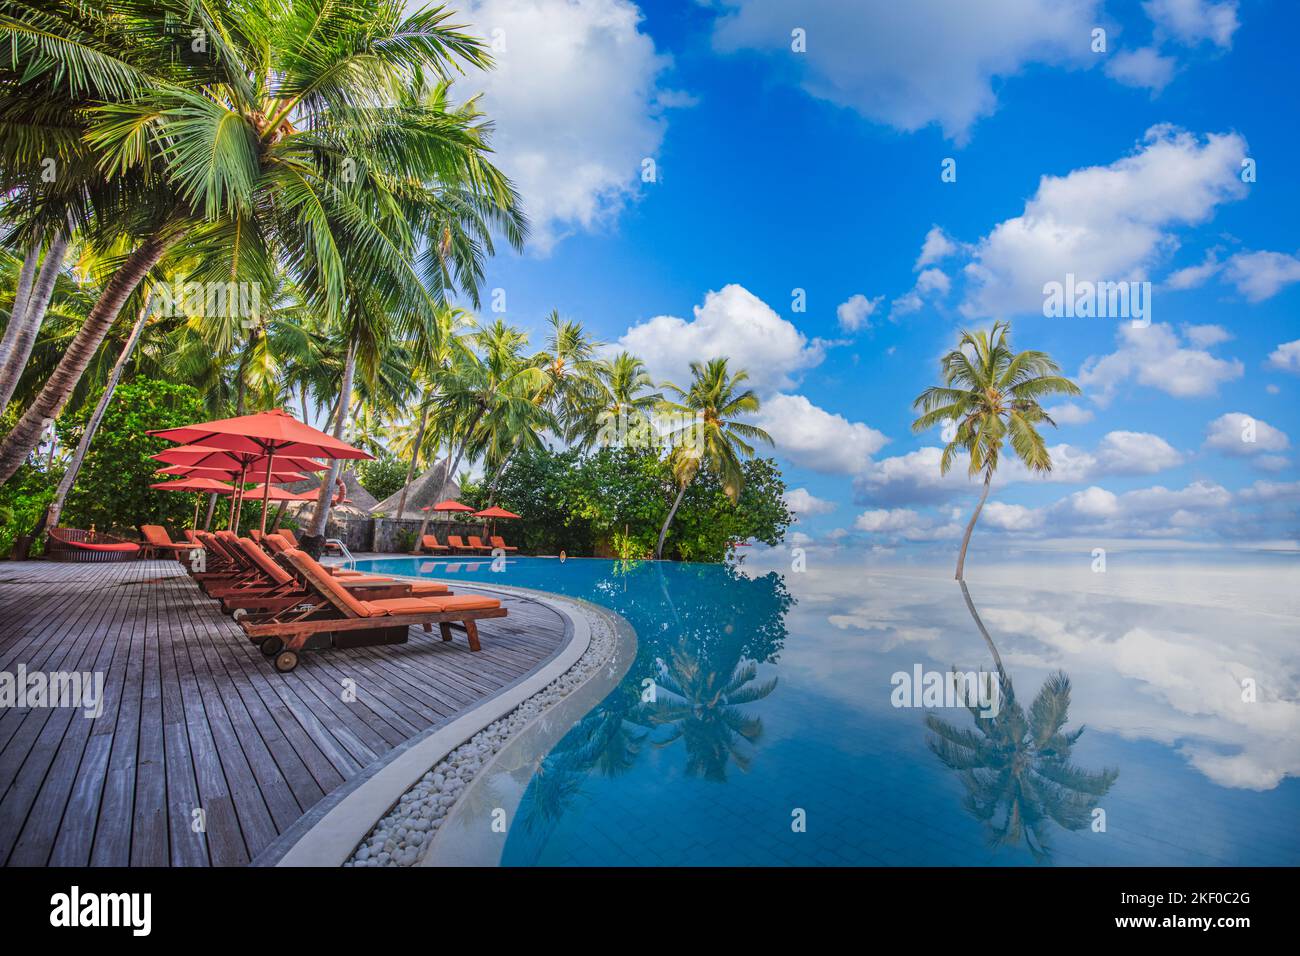 Luxurious beach resort with swimming pool seaside beach chairs or loungers under umbrellas with palm trees and blue sky. Summer travel hotel vacation Stock Photo